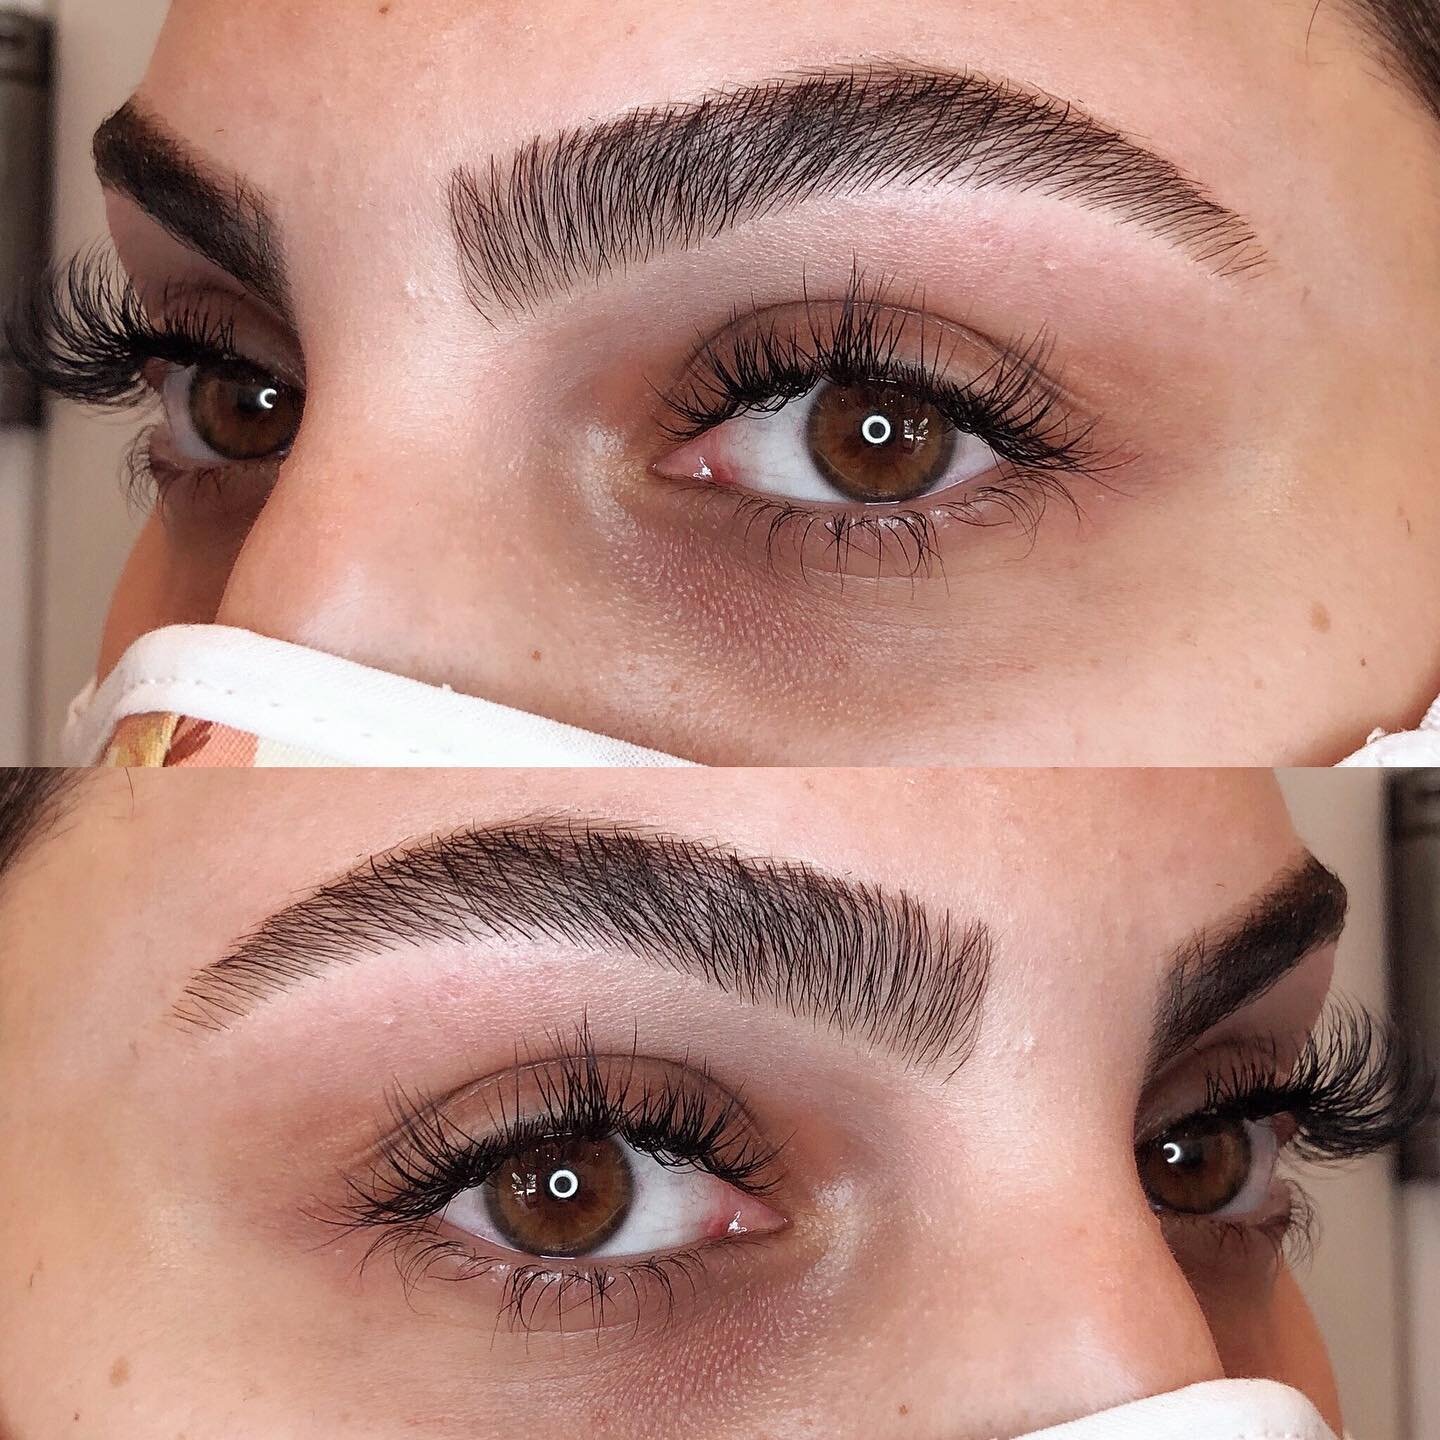 Swooning over these full beauties! No pencil needed ✨
This opening week was a WHIRLWIND but it was amazing to see you all, catch up on life and get those brows back into shape⚡️⚡️
#eyebrowshaping #eyebrows #ocsalon #aliso viejo